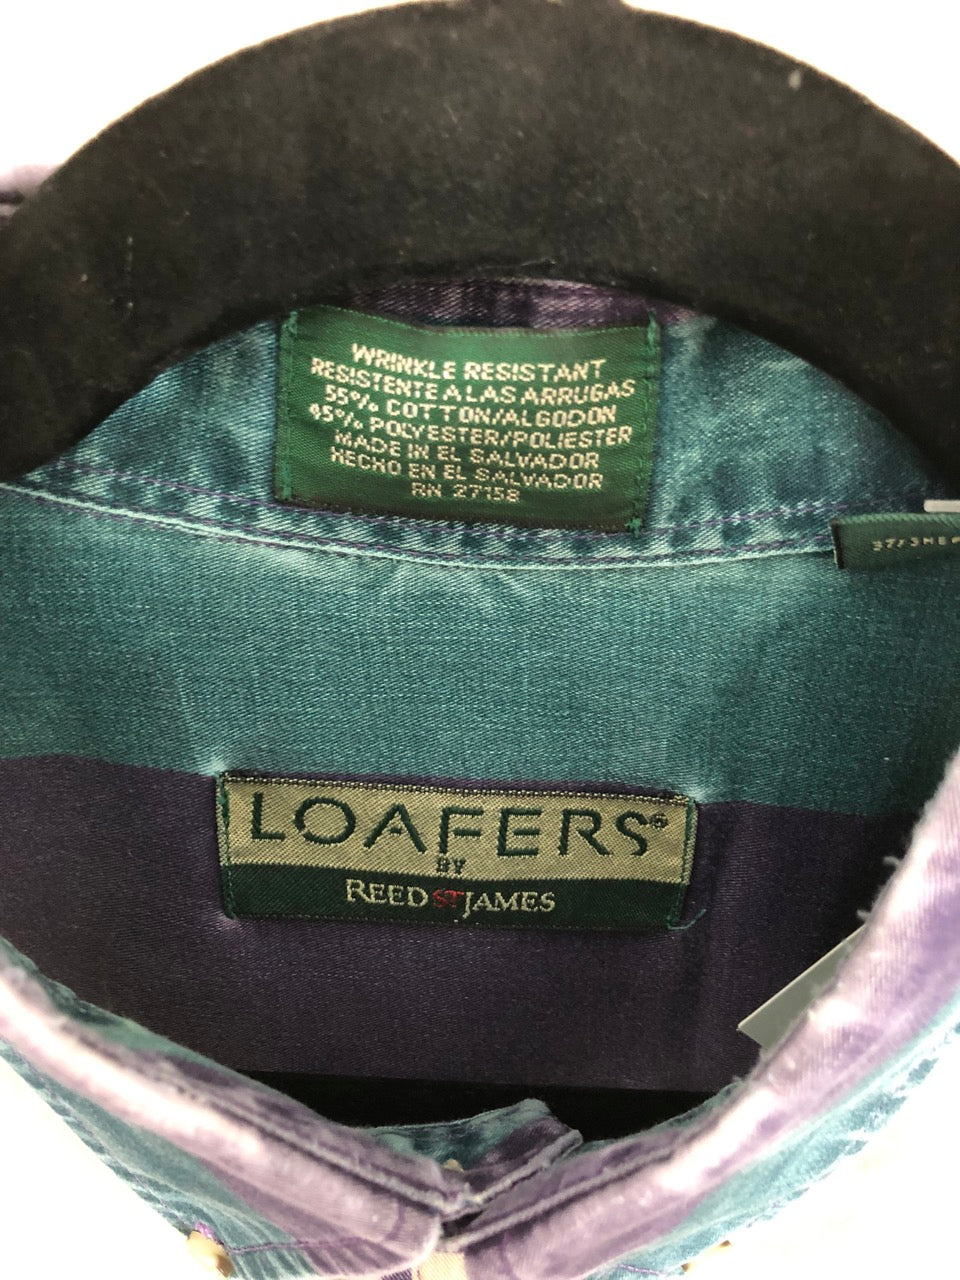 Loafers by Reed St James Shirt